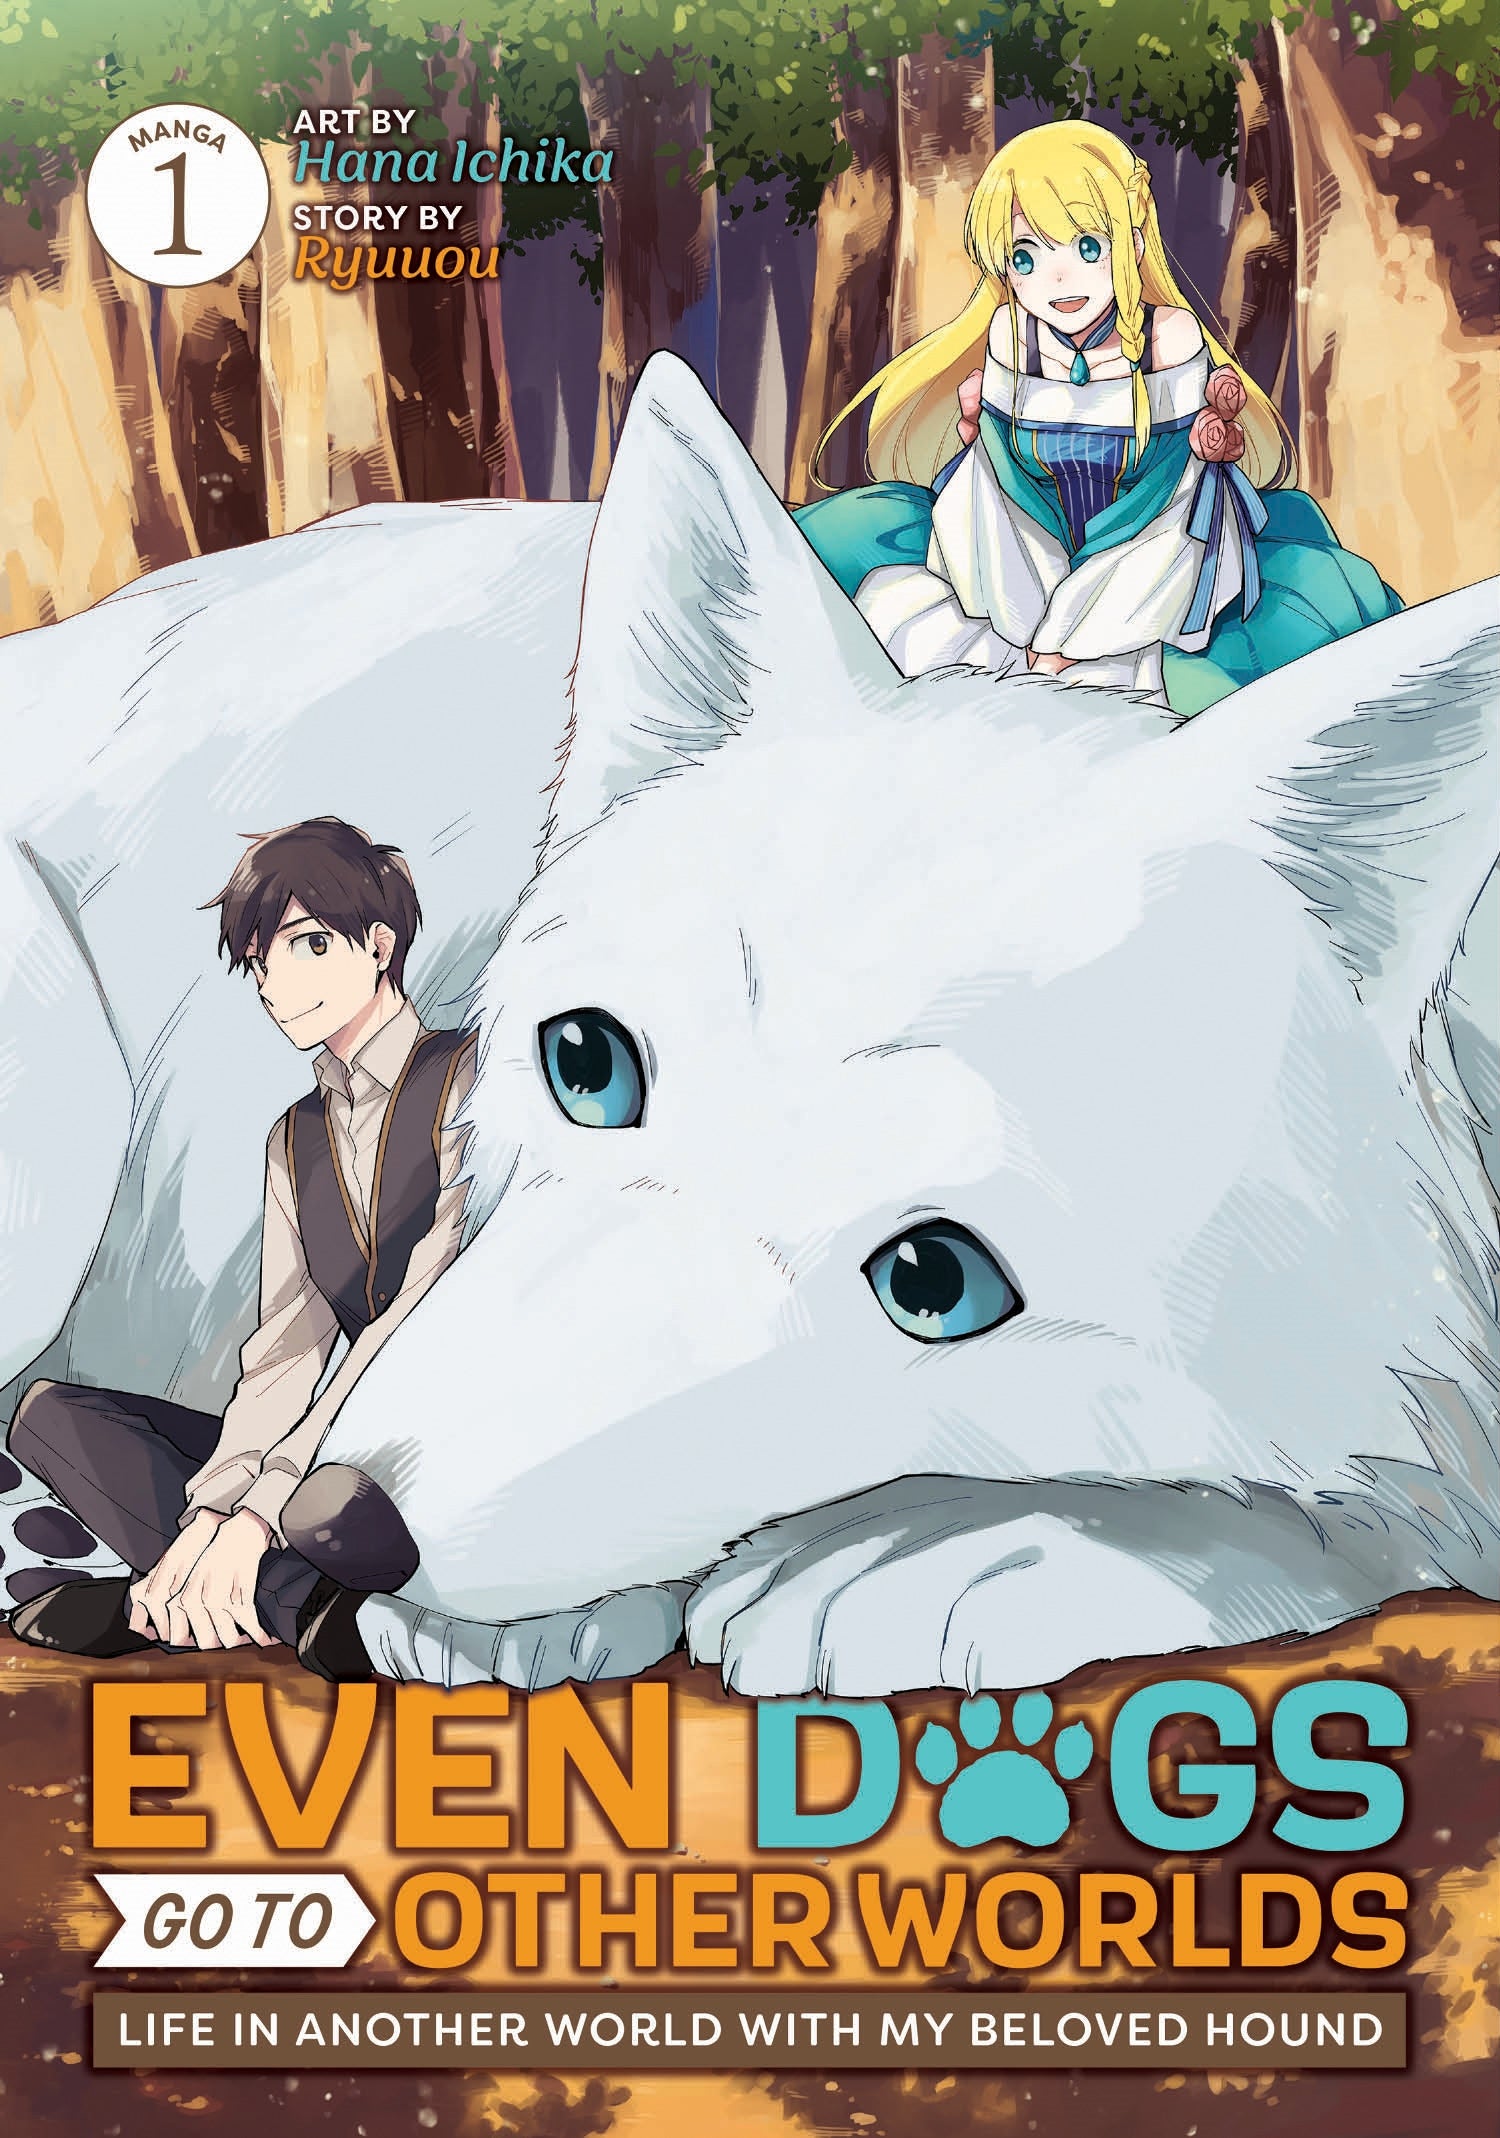 Even Dogs Go to Other Worlds Life in Another World with My Beloved Hound (Manga) Vol. 1